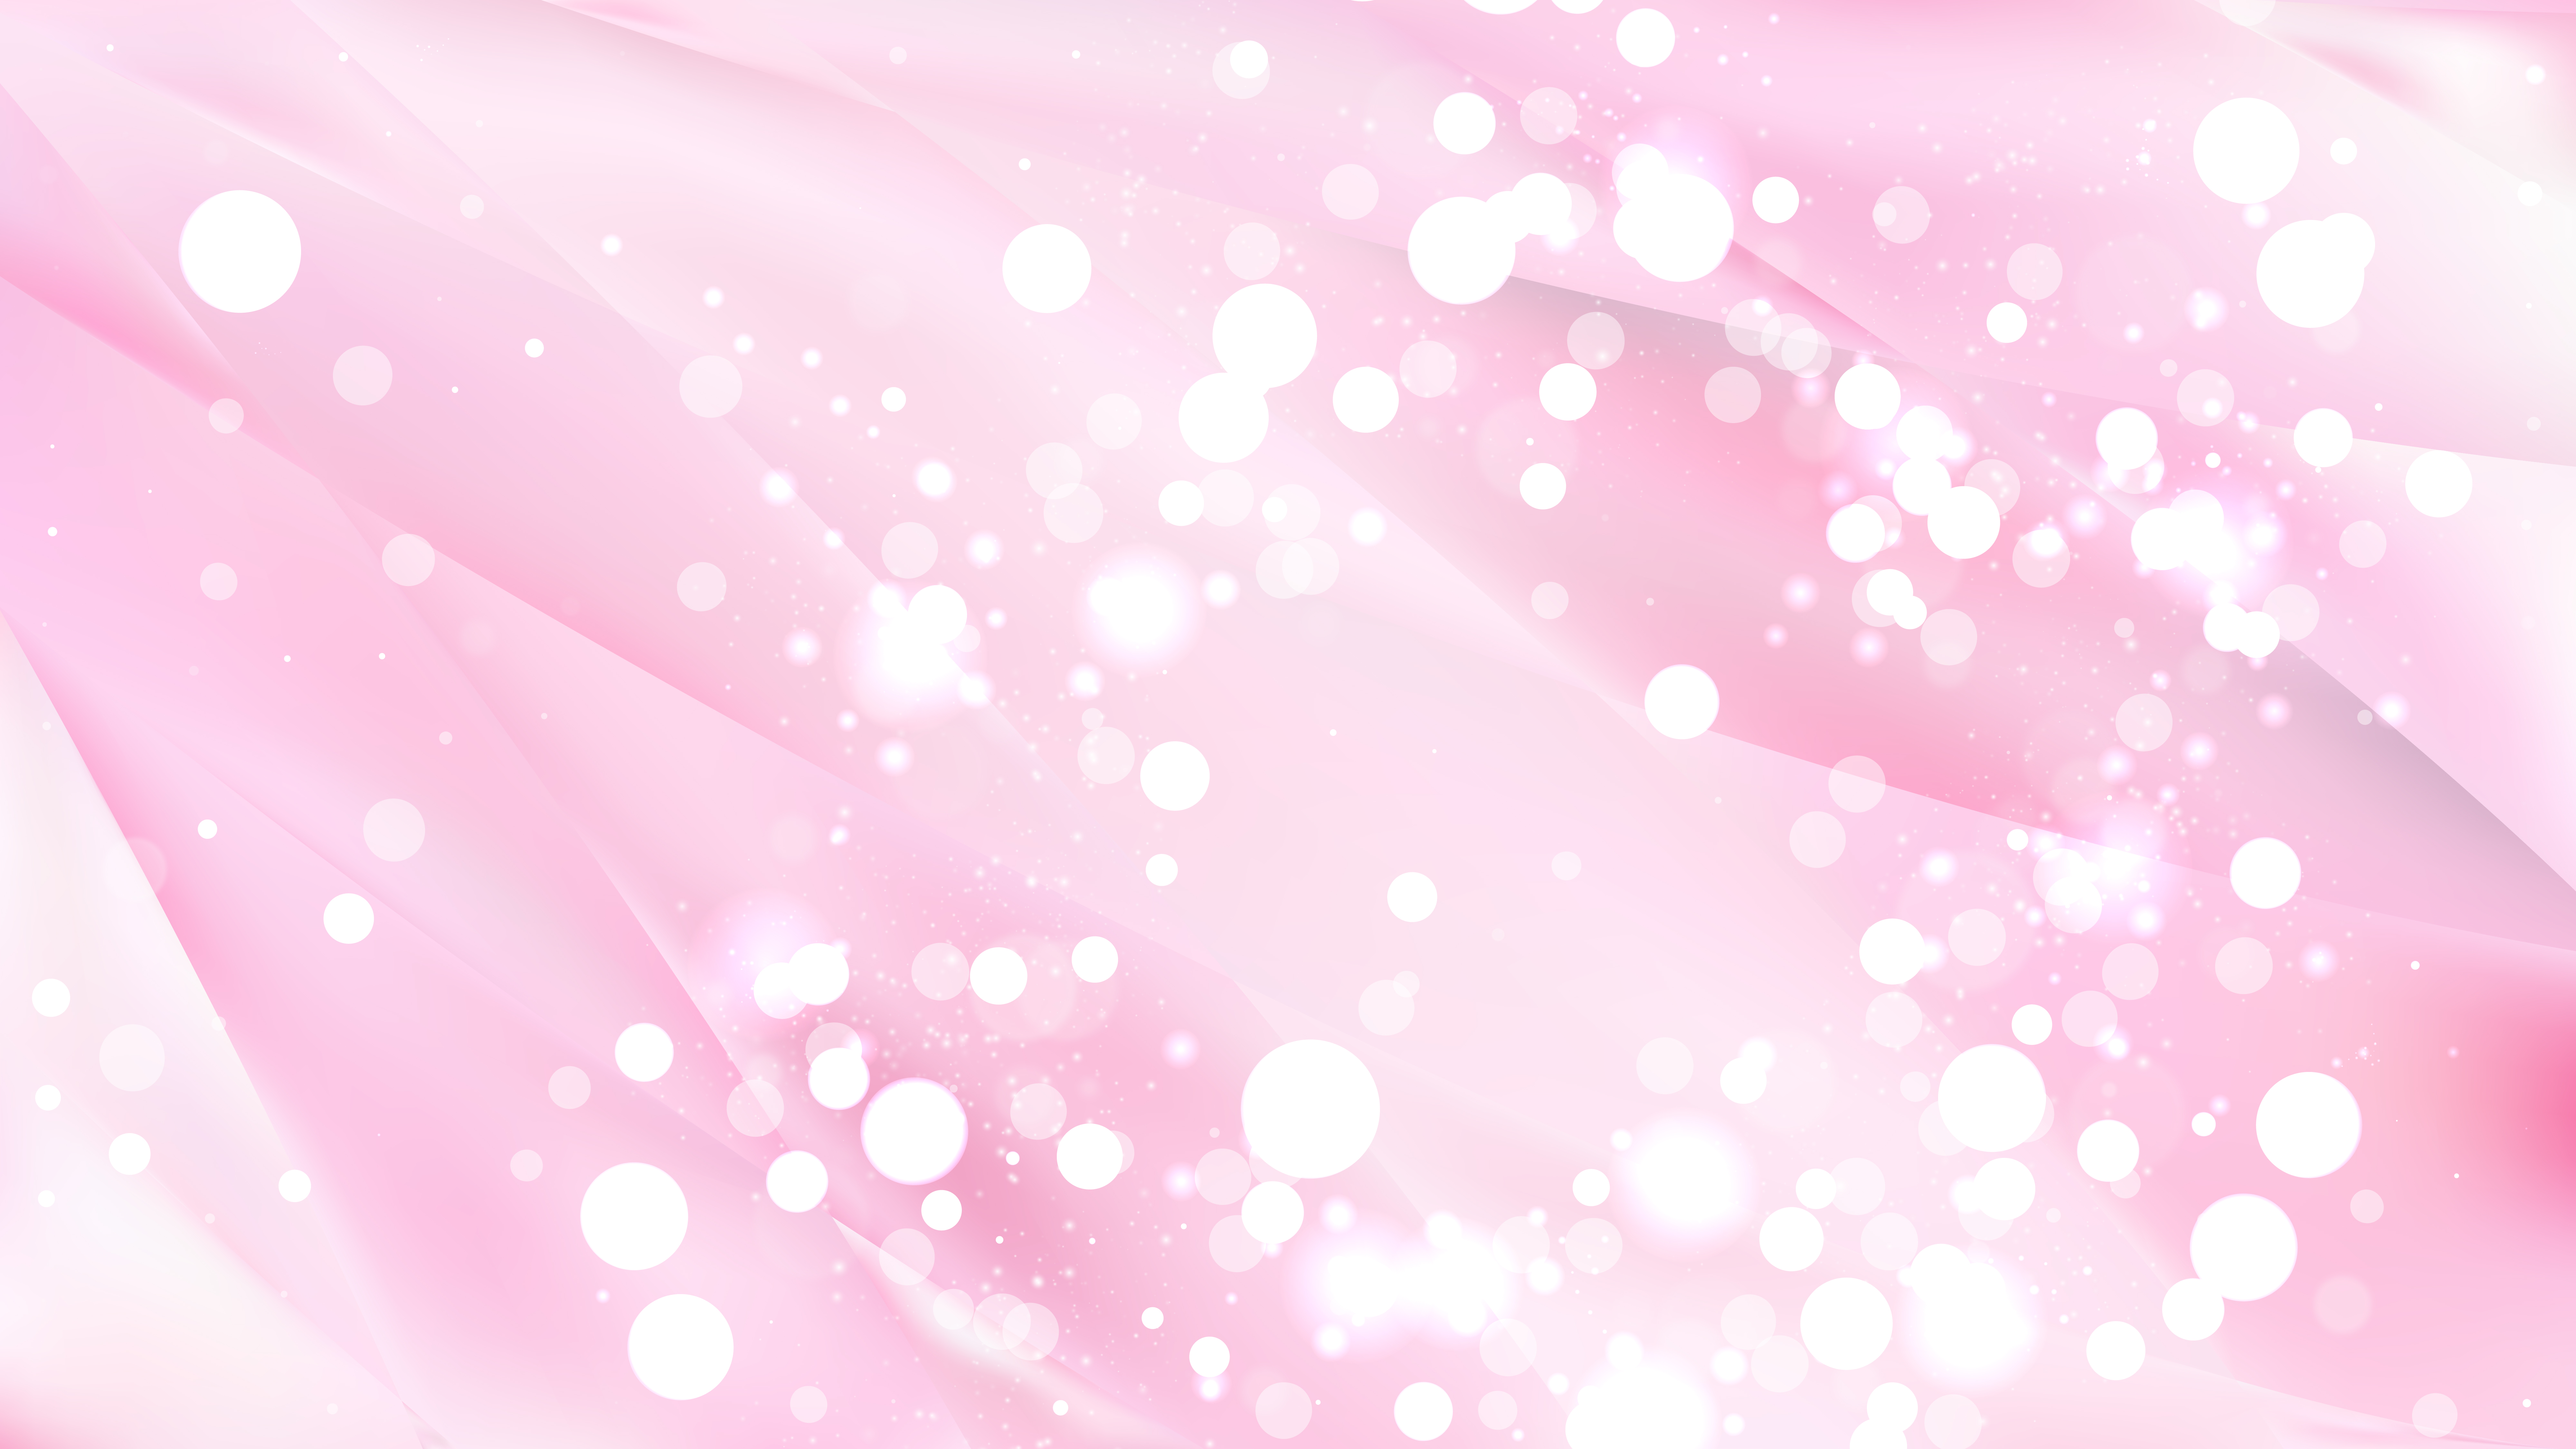 Free Abstract Pastel Pink Blurred Lights Background Design